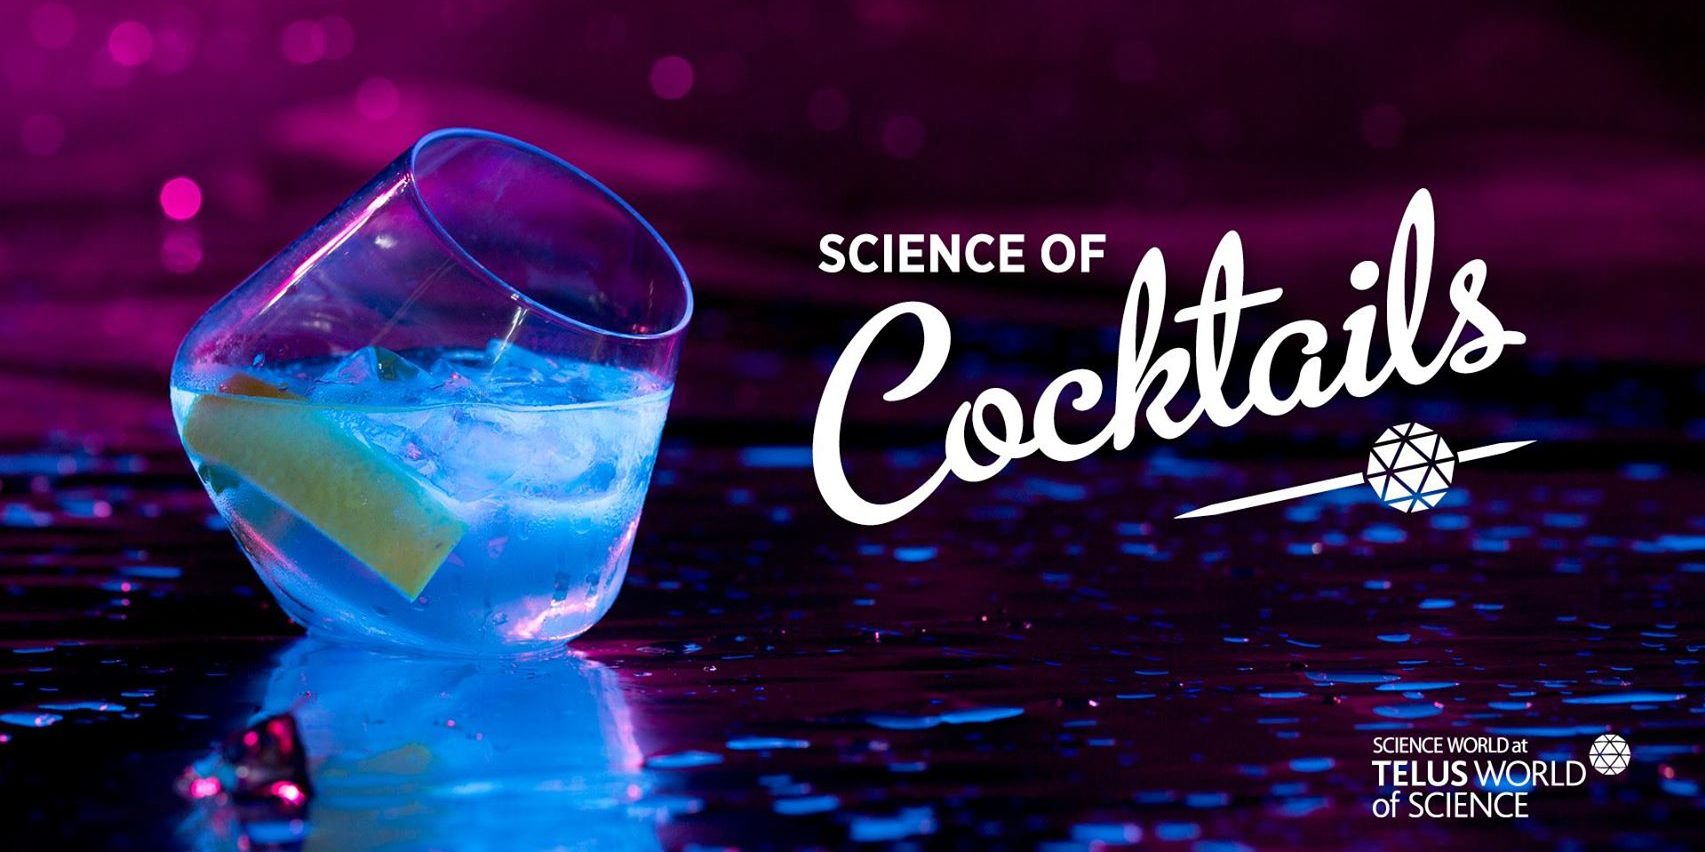 Science of Cocktails 2017